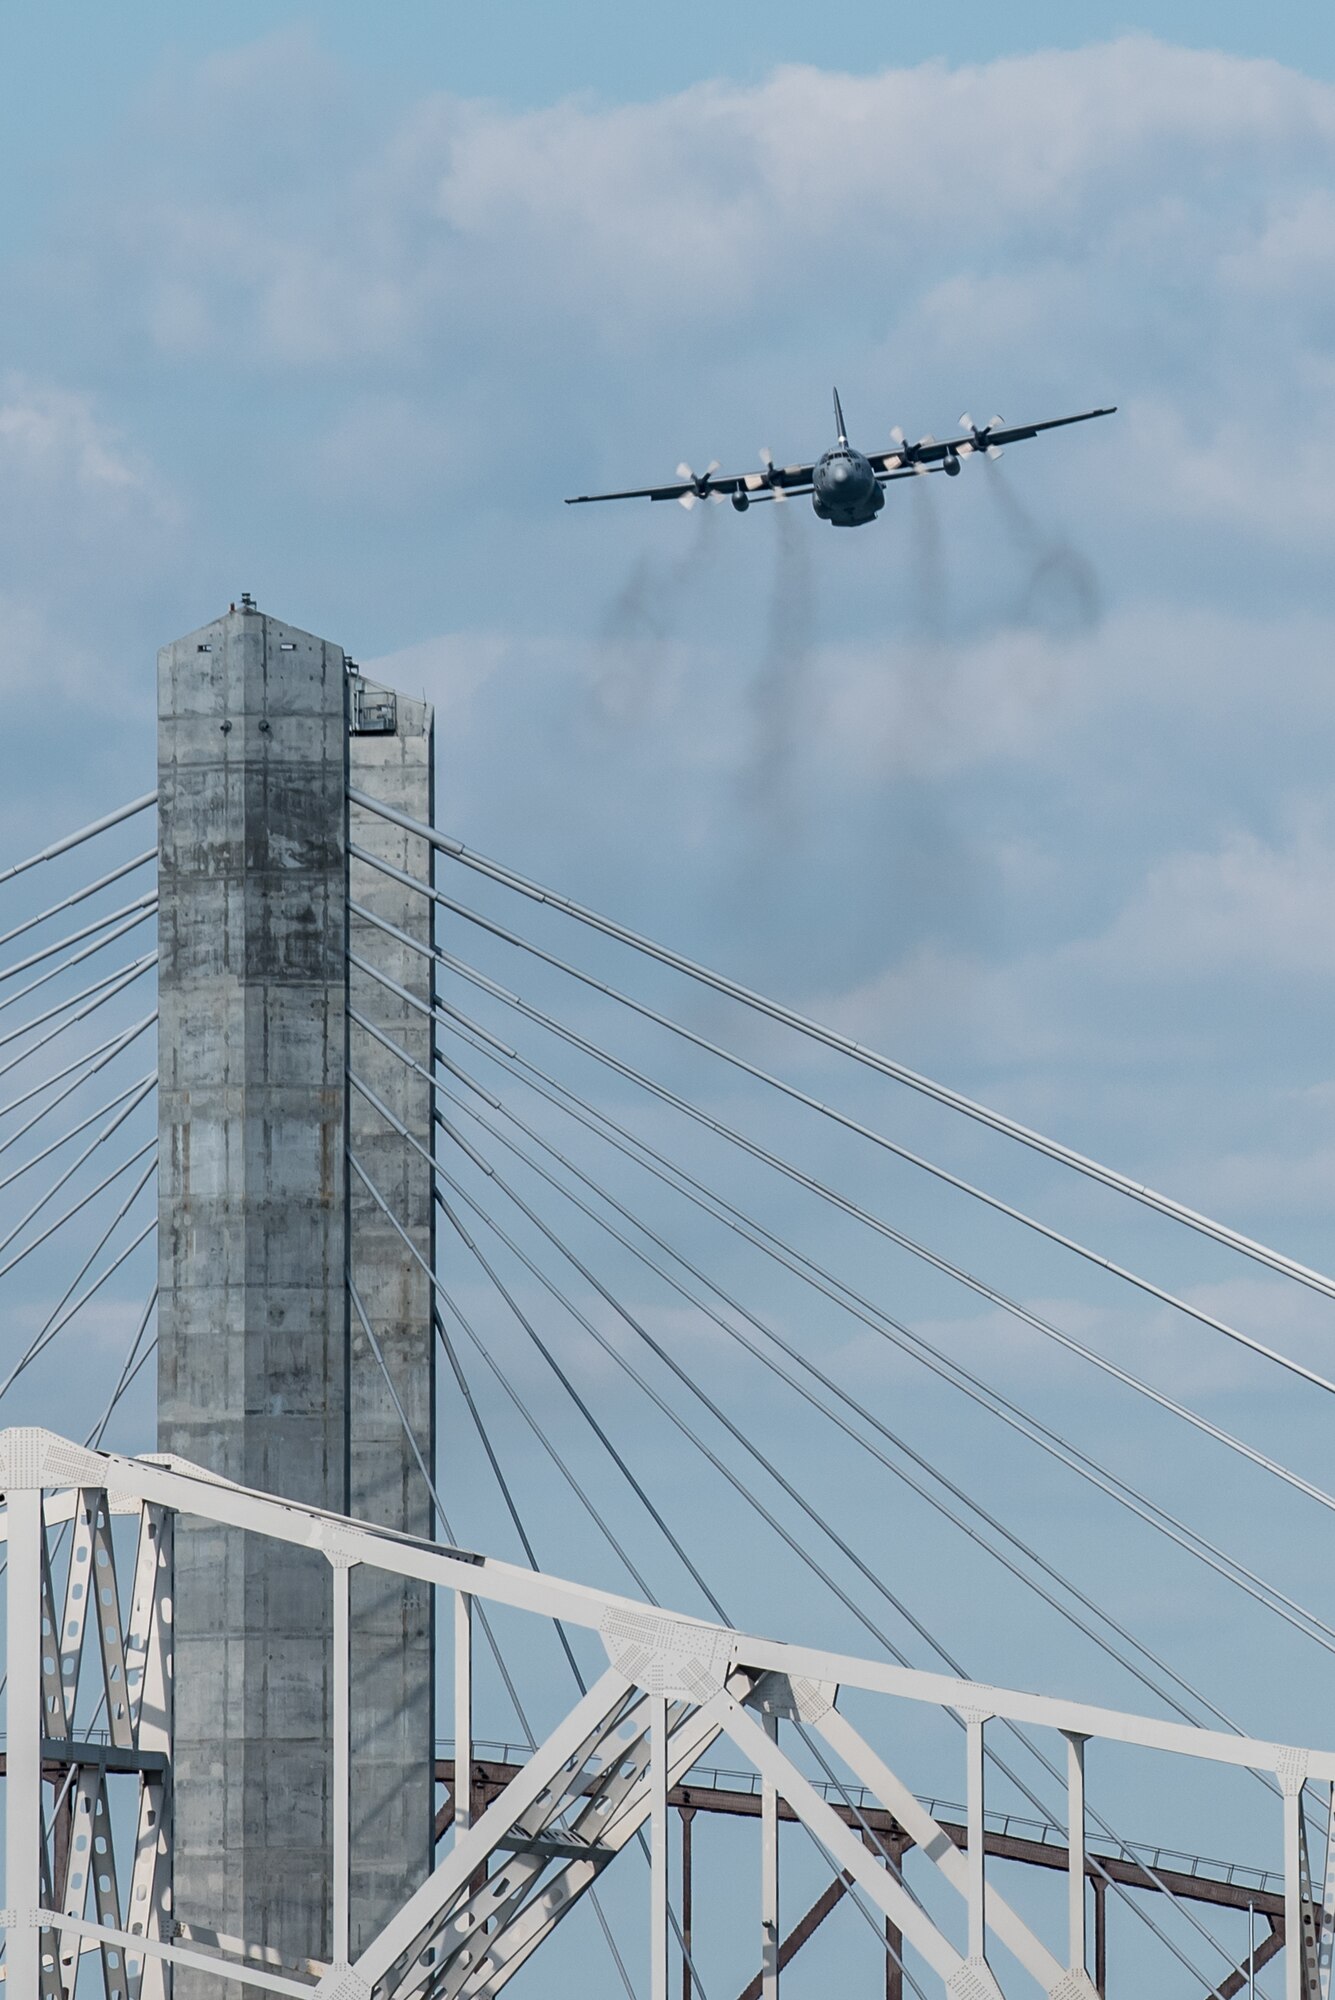 A Kentucky Air National Guard C-130 Hercules transport approaches the show box during the Thunder Over Louisville air show in downtown Louisville, Ky., in 2016. The aircraft will serve as a jump platform for members of the Kentucky Air Guard's 123rd Special Tactics Squadron during the 2018 air show, scheduled for April 21. The special operators will parachute into the Ohio River as part of a demonstration on insertion techniques.